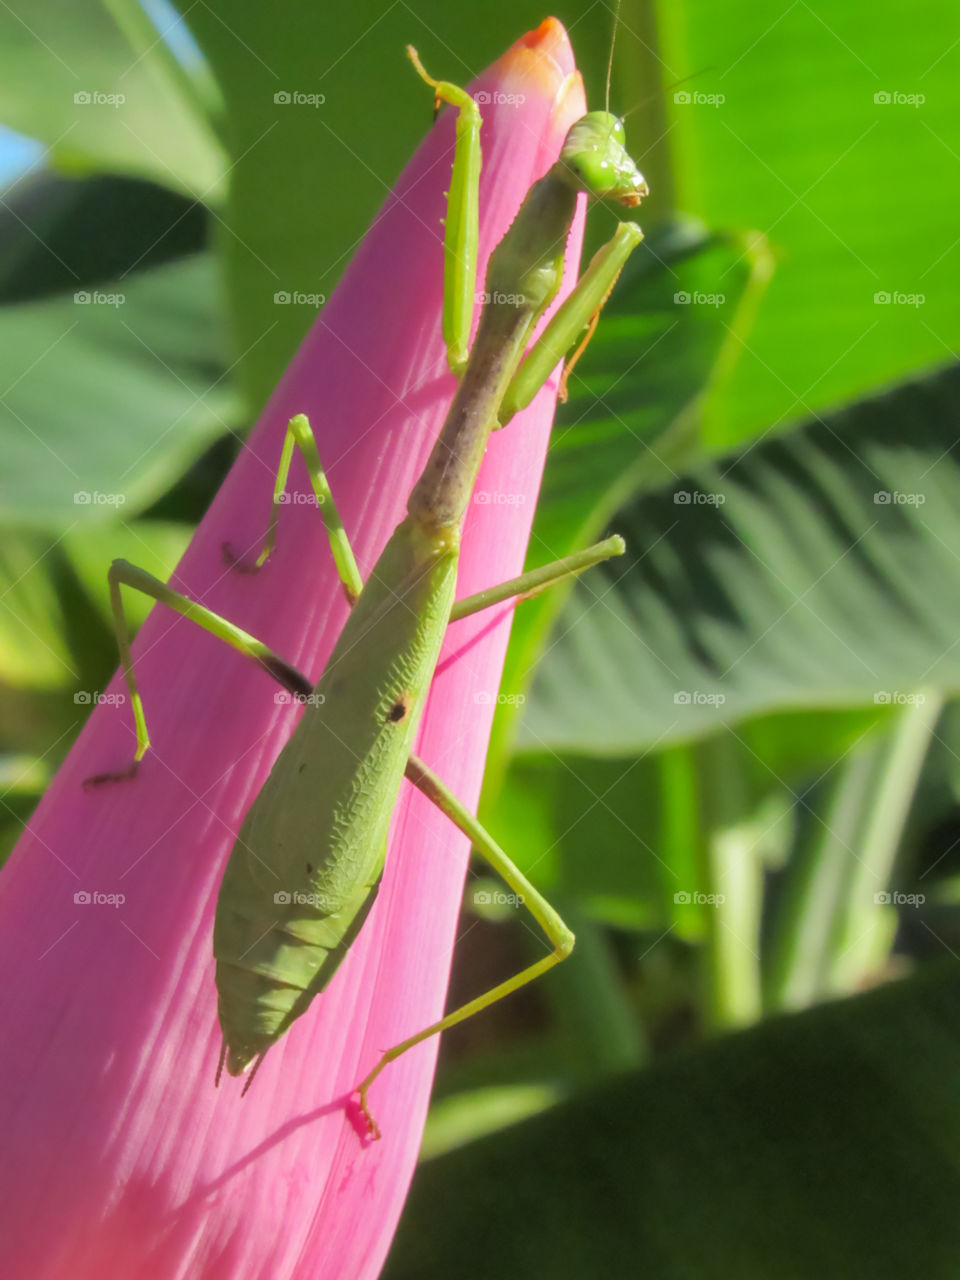 green praying mantis insect on pink banana flower plant outdoors